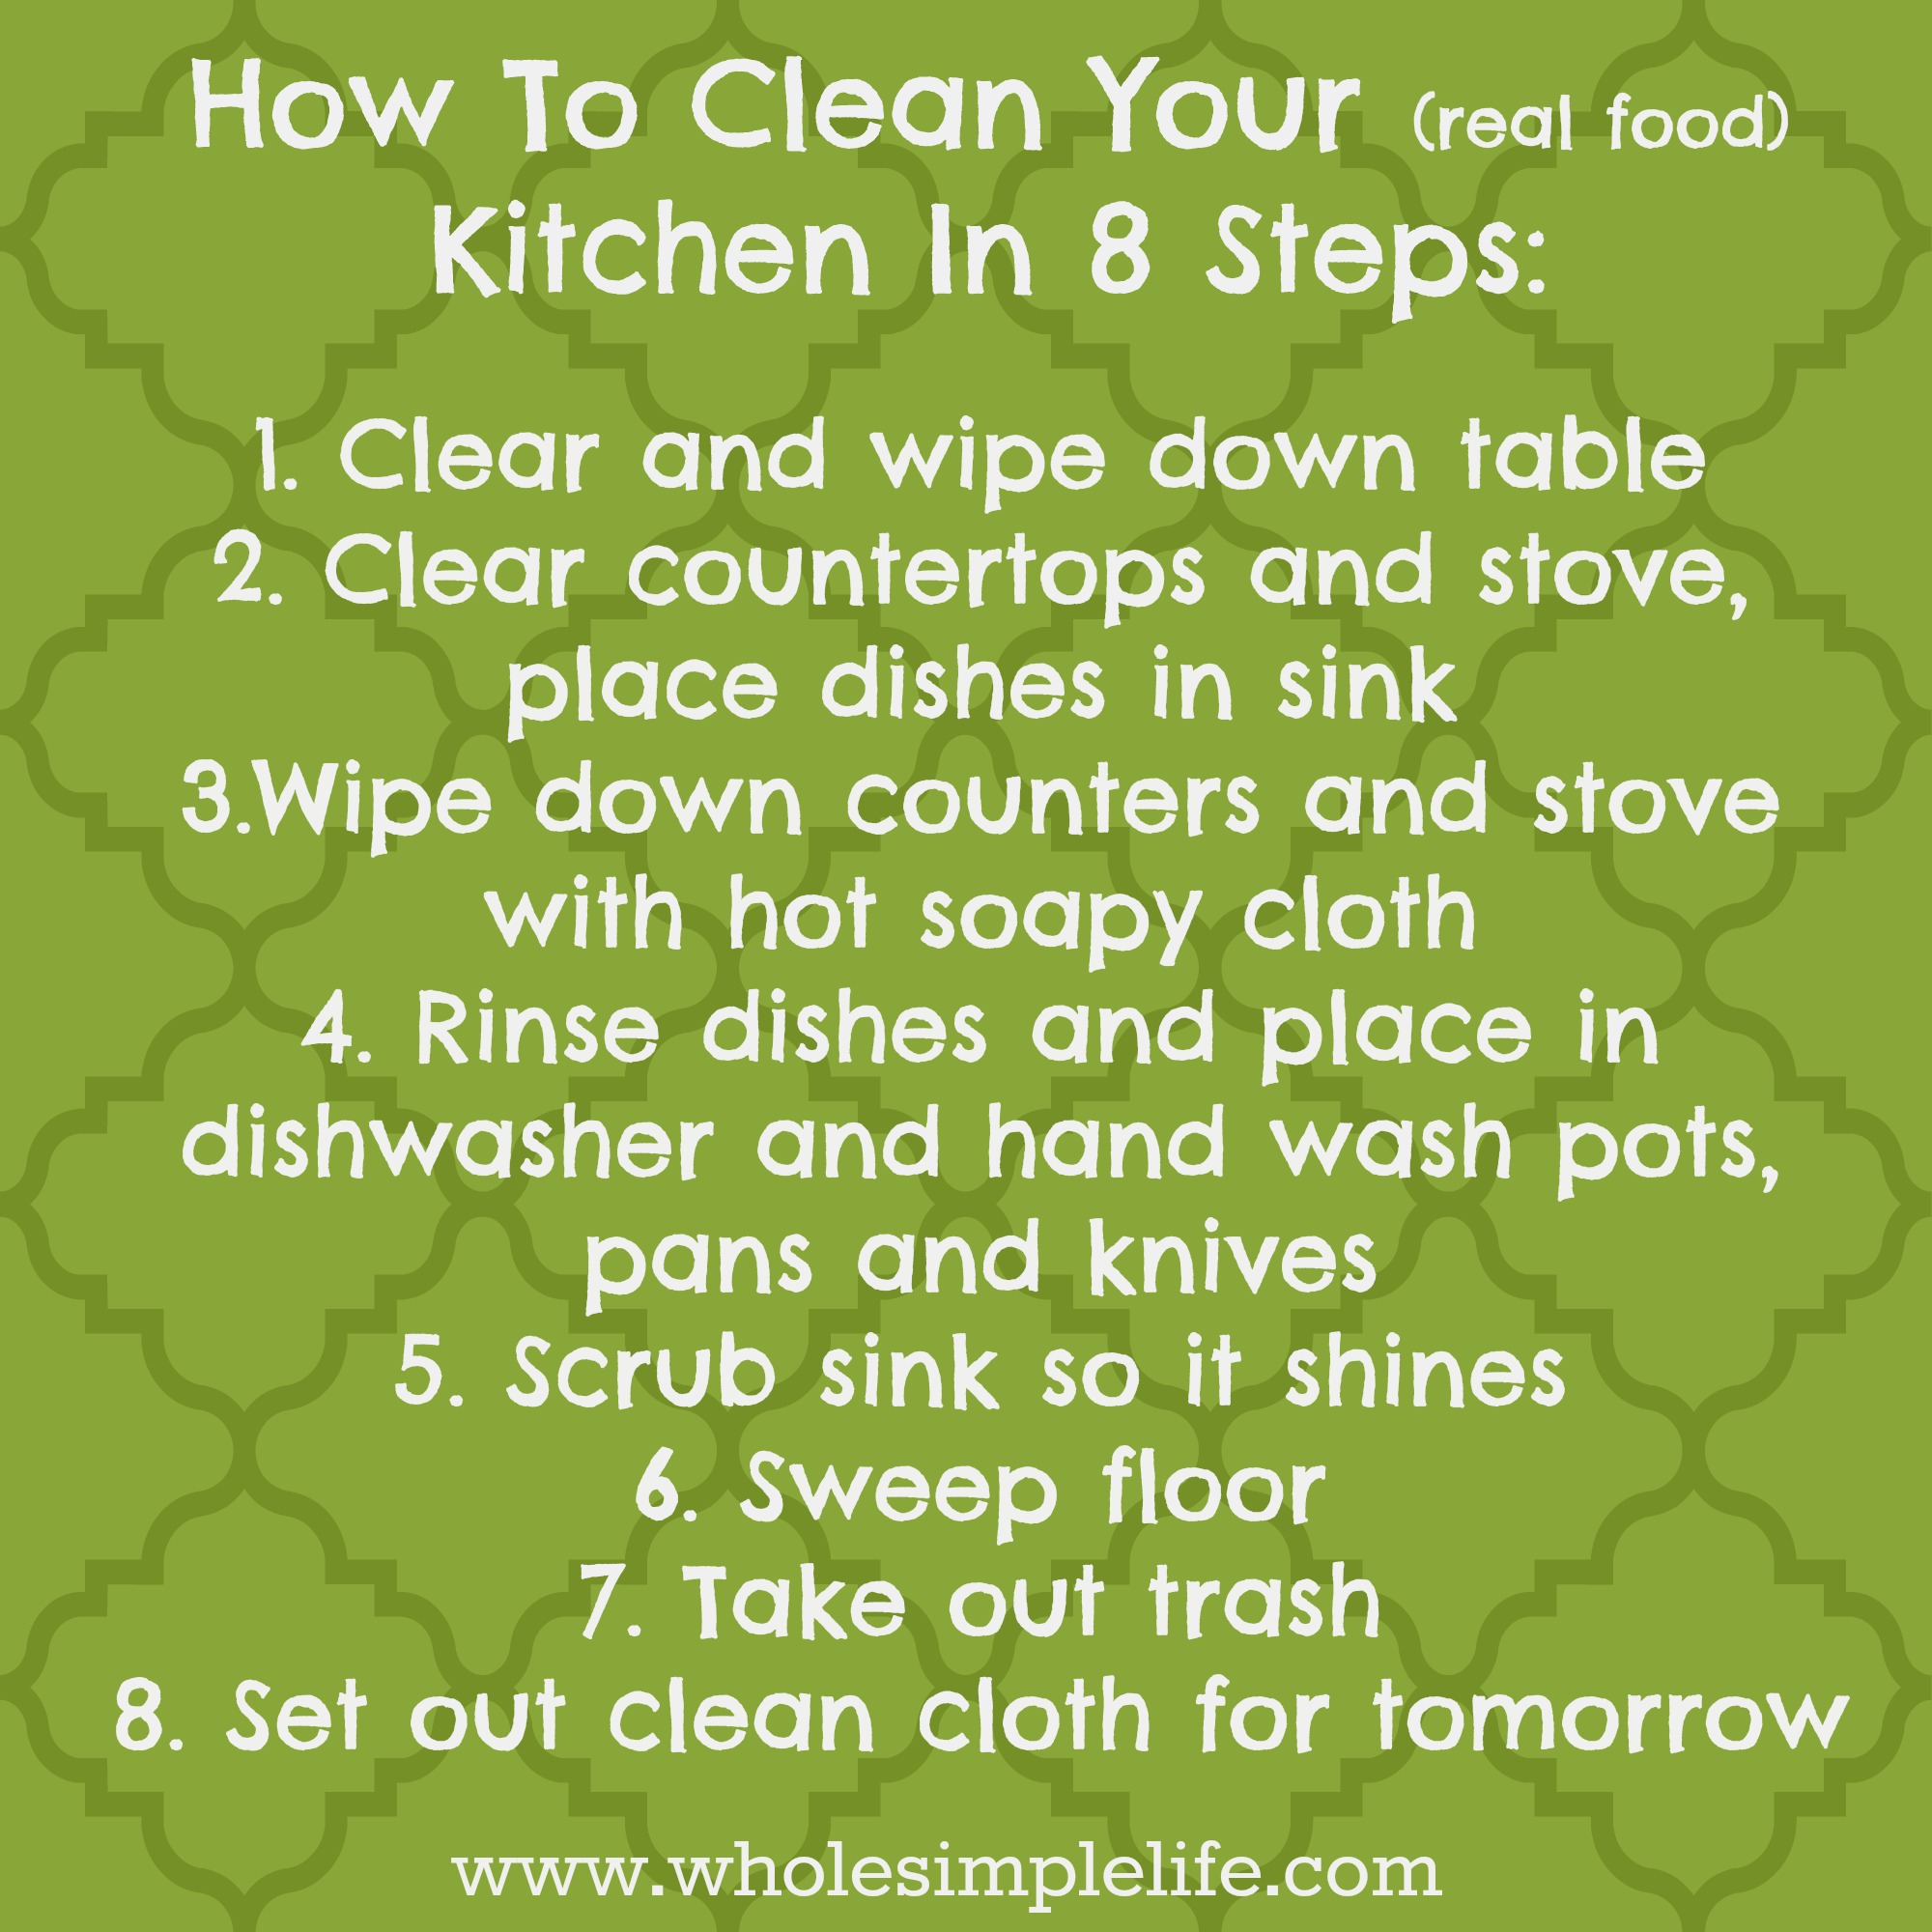 How To Clean Your Kitchen In 8 Simple Steps,Jack Schlossberg John Kennedy Jr